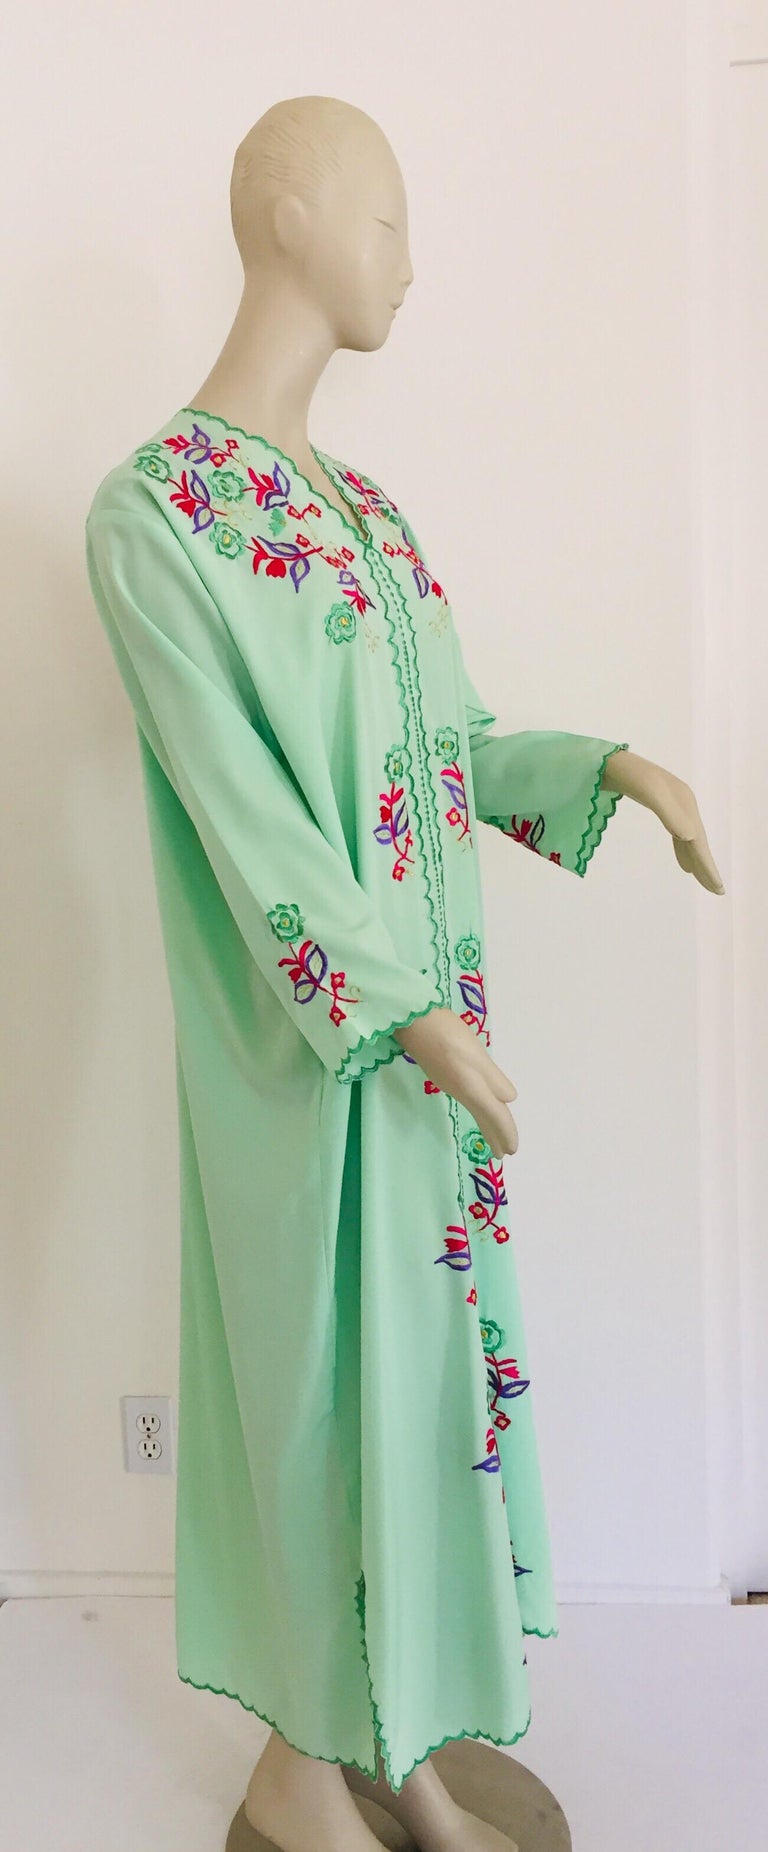 Elegant Moroccan caftan with embroidered floral designs,
circa 1970s.
The kaftan features a traditional neckline, with side slits and embellished sleeves and front.
In Morocco, fashion preserves its traditional style inherited from great